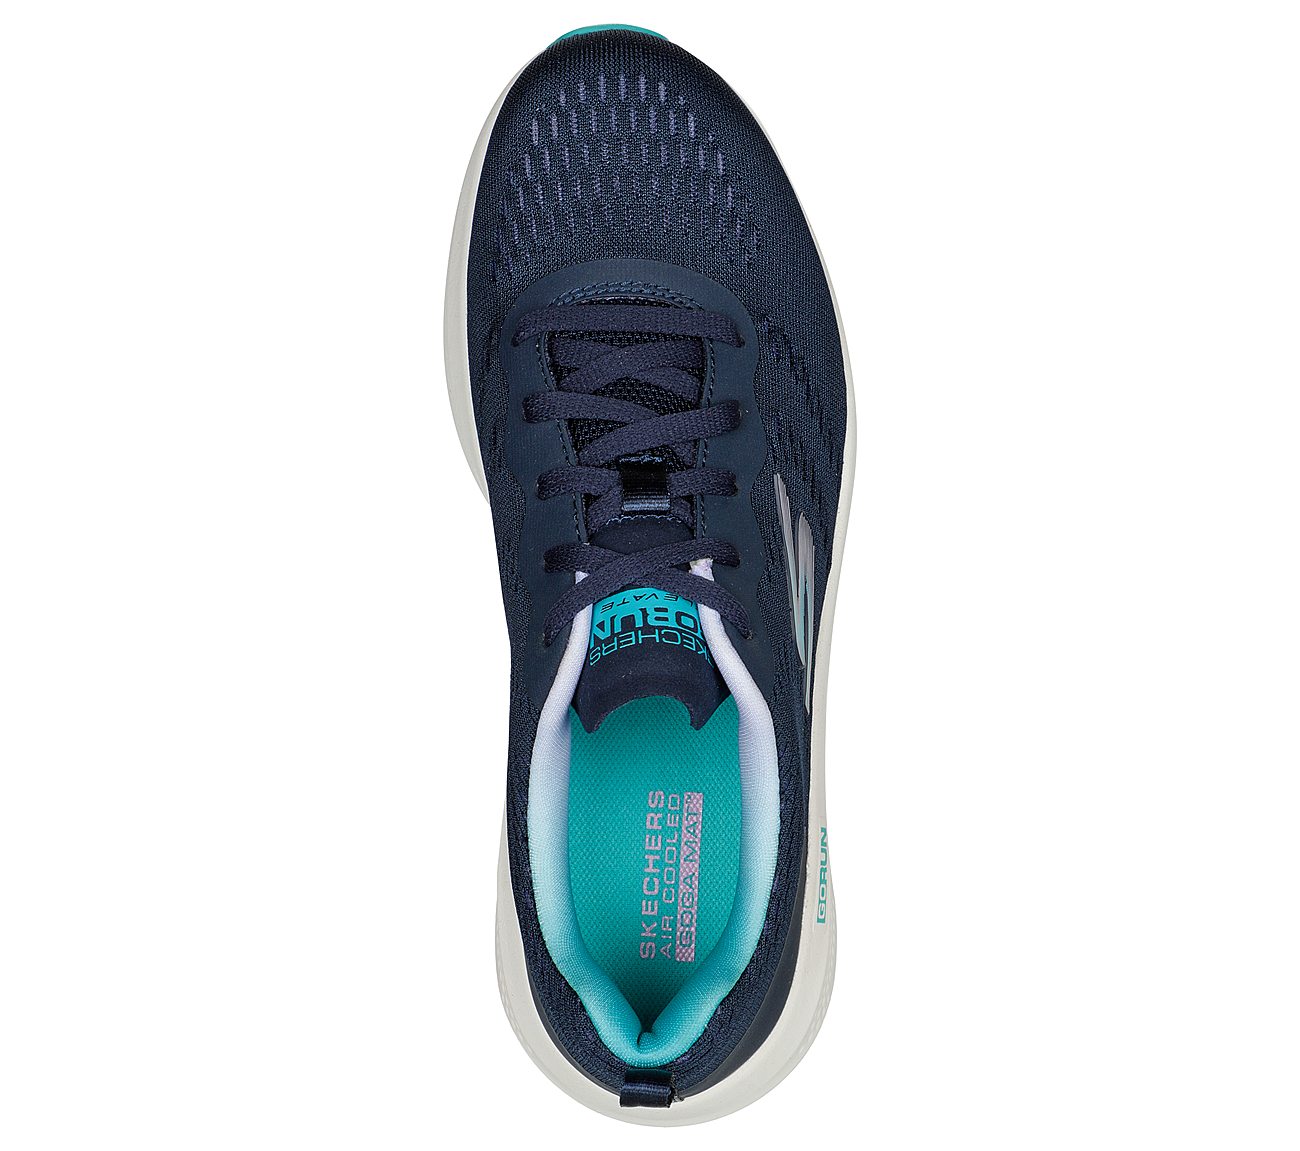 GO RUN ELEVATE - DOUBLE TIME, NAVY/MULTI Footwear Top View